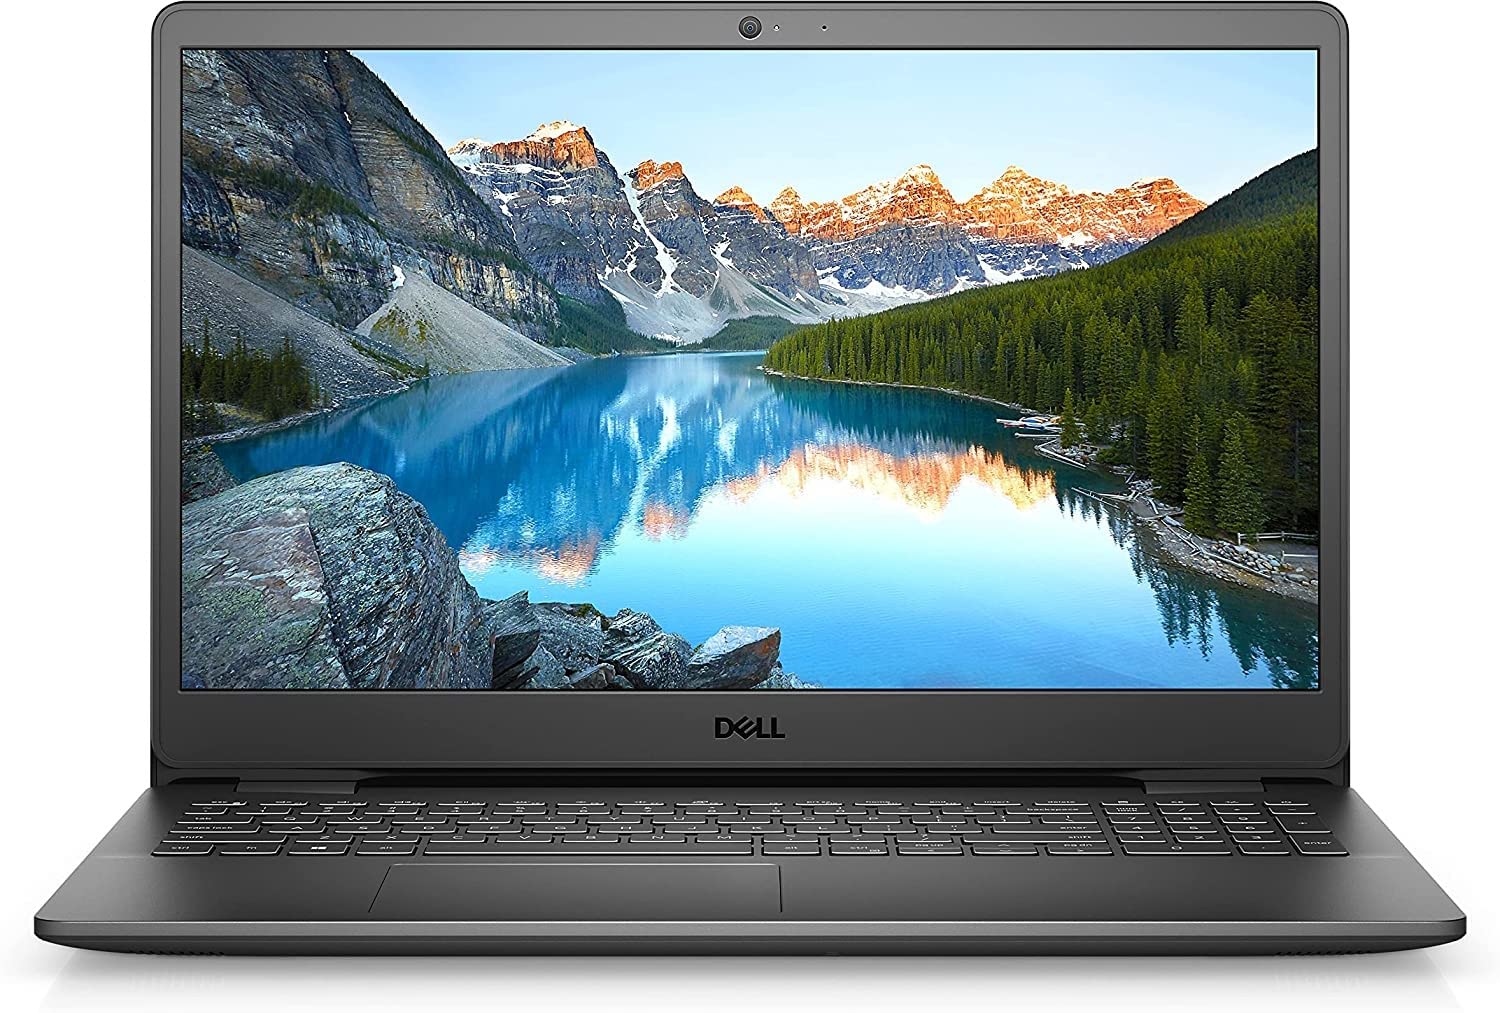 Dell Inspiron 15 3502 Notebook